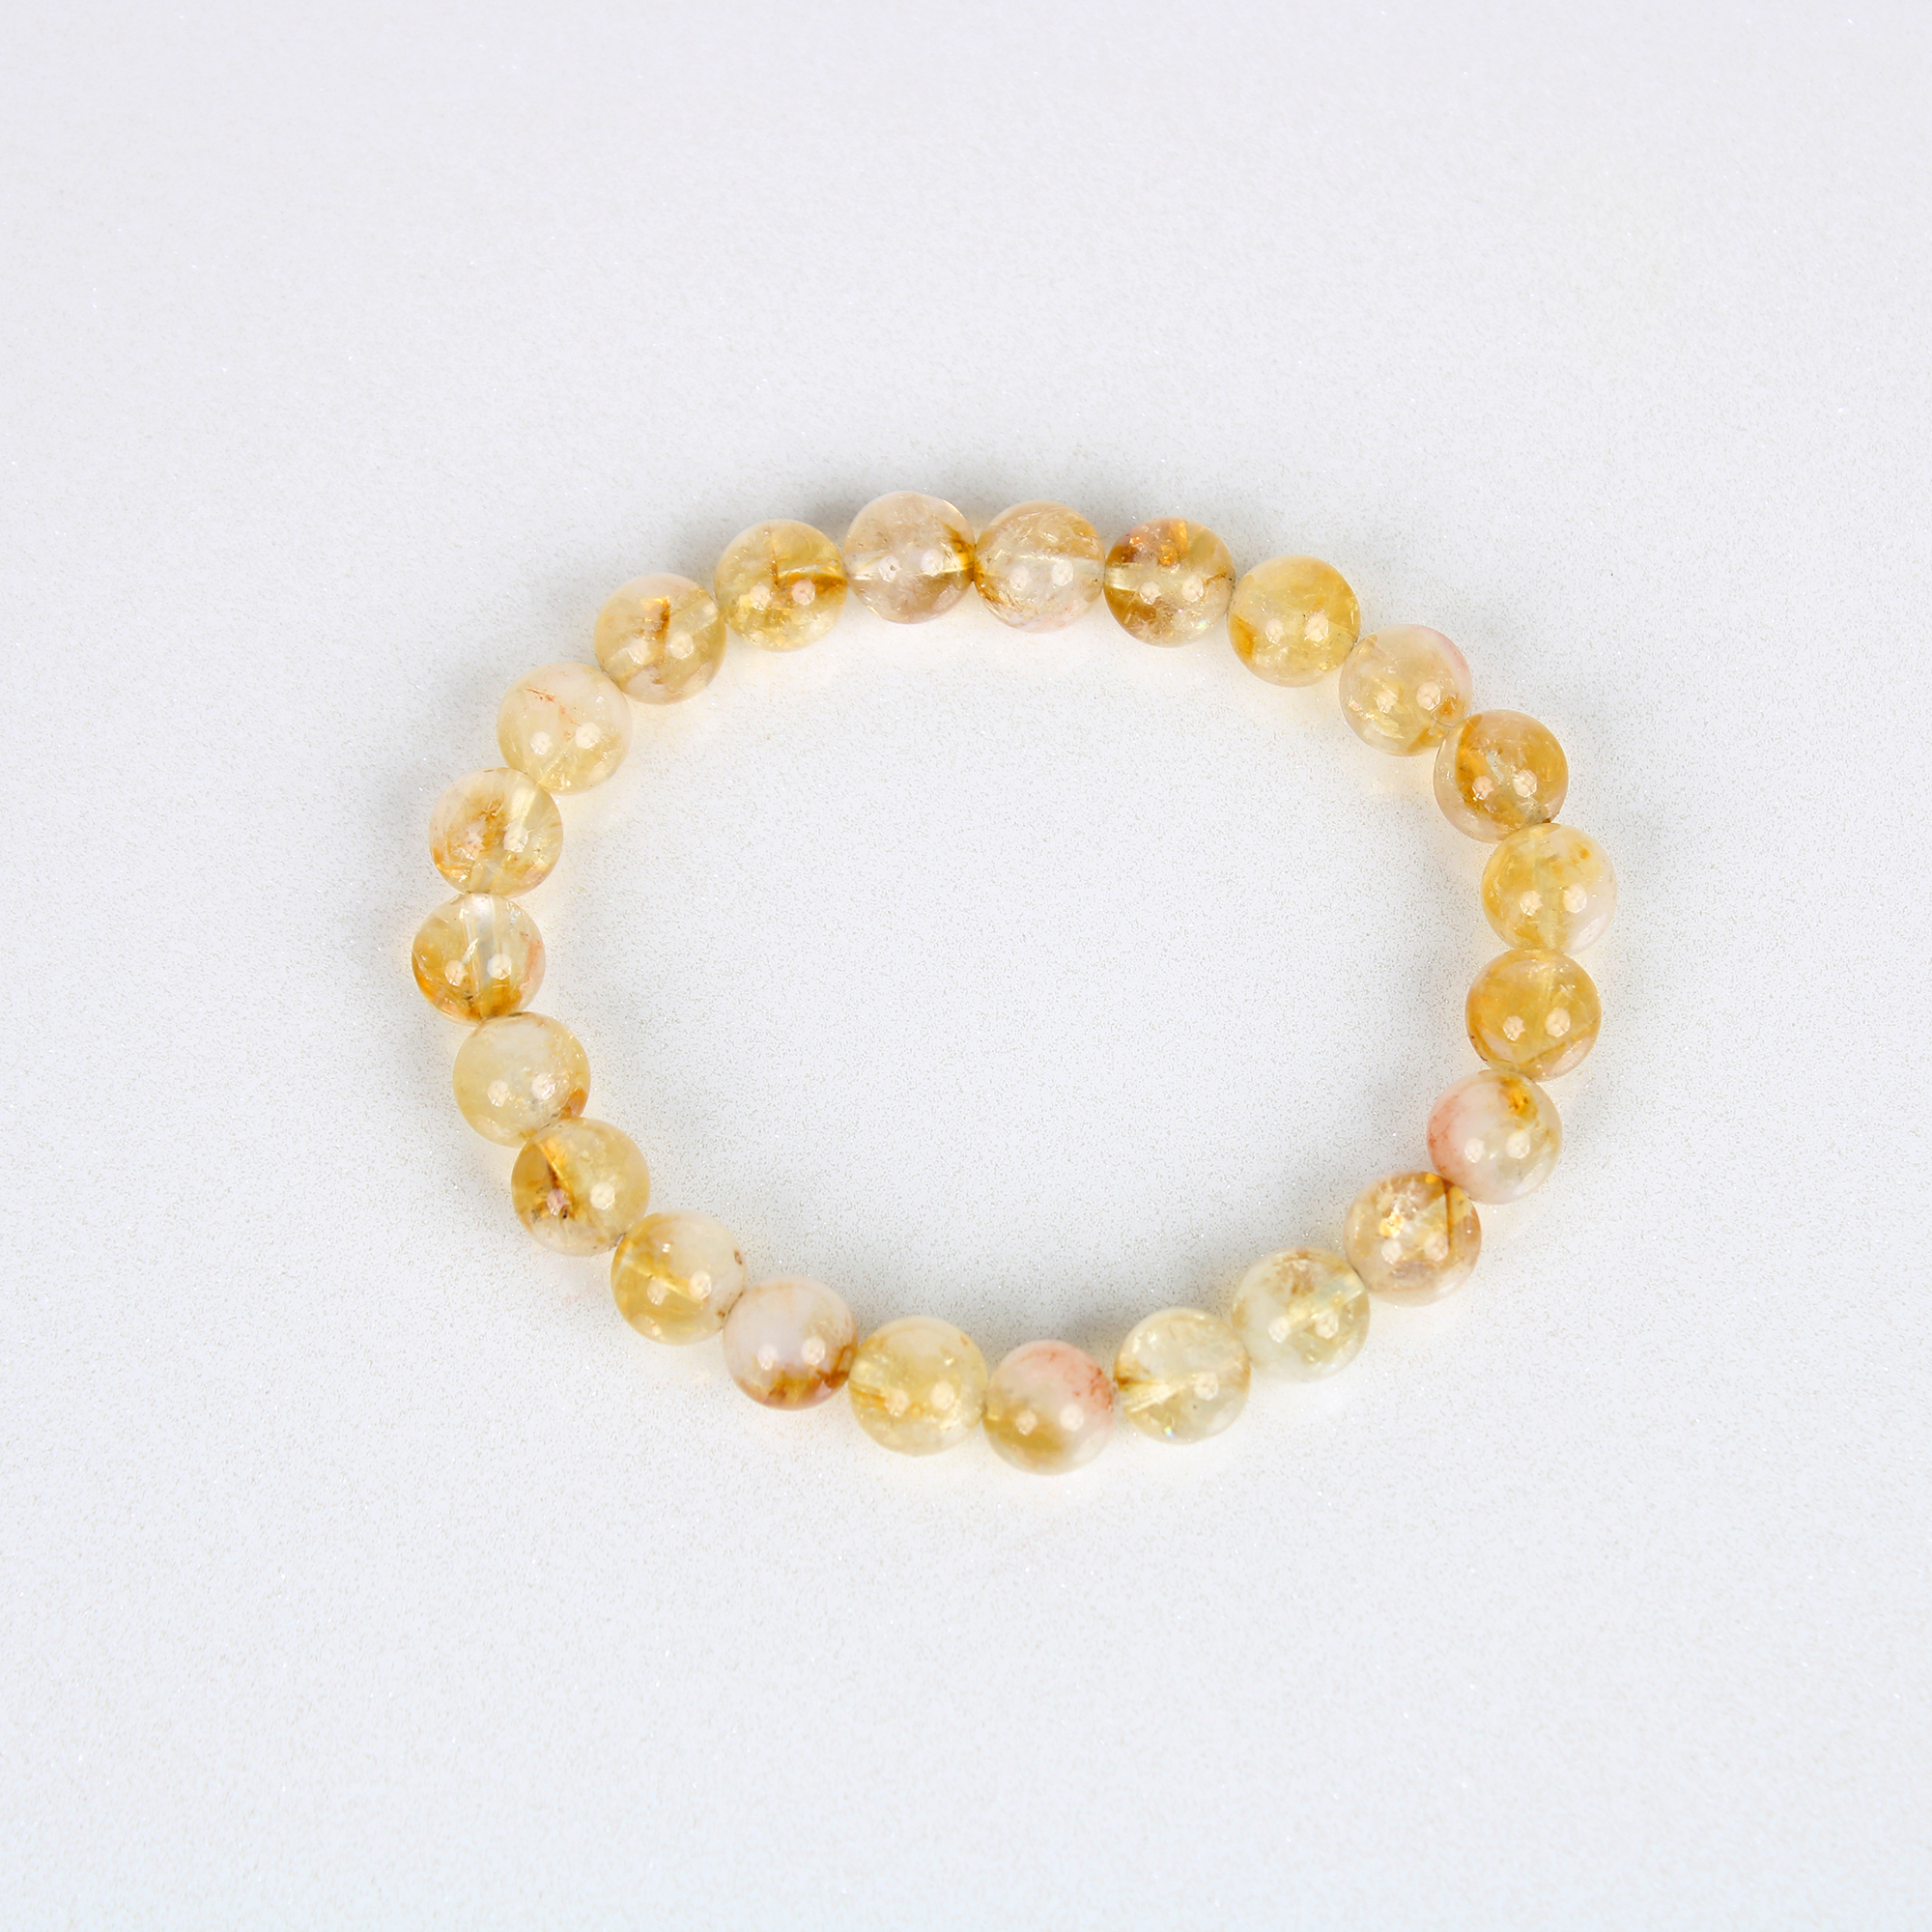 Citrine Bracelet For Wealth By Asana Crystals